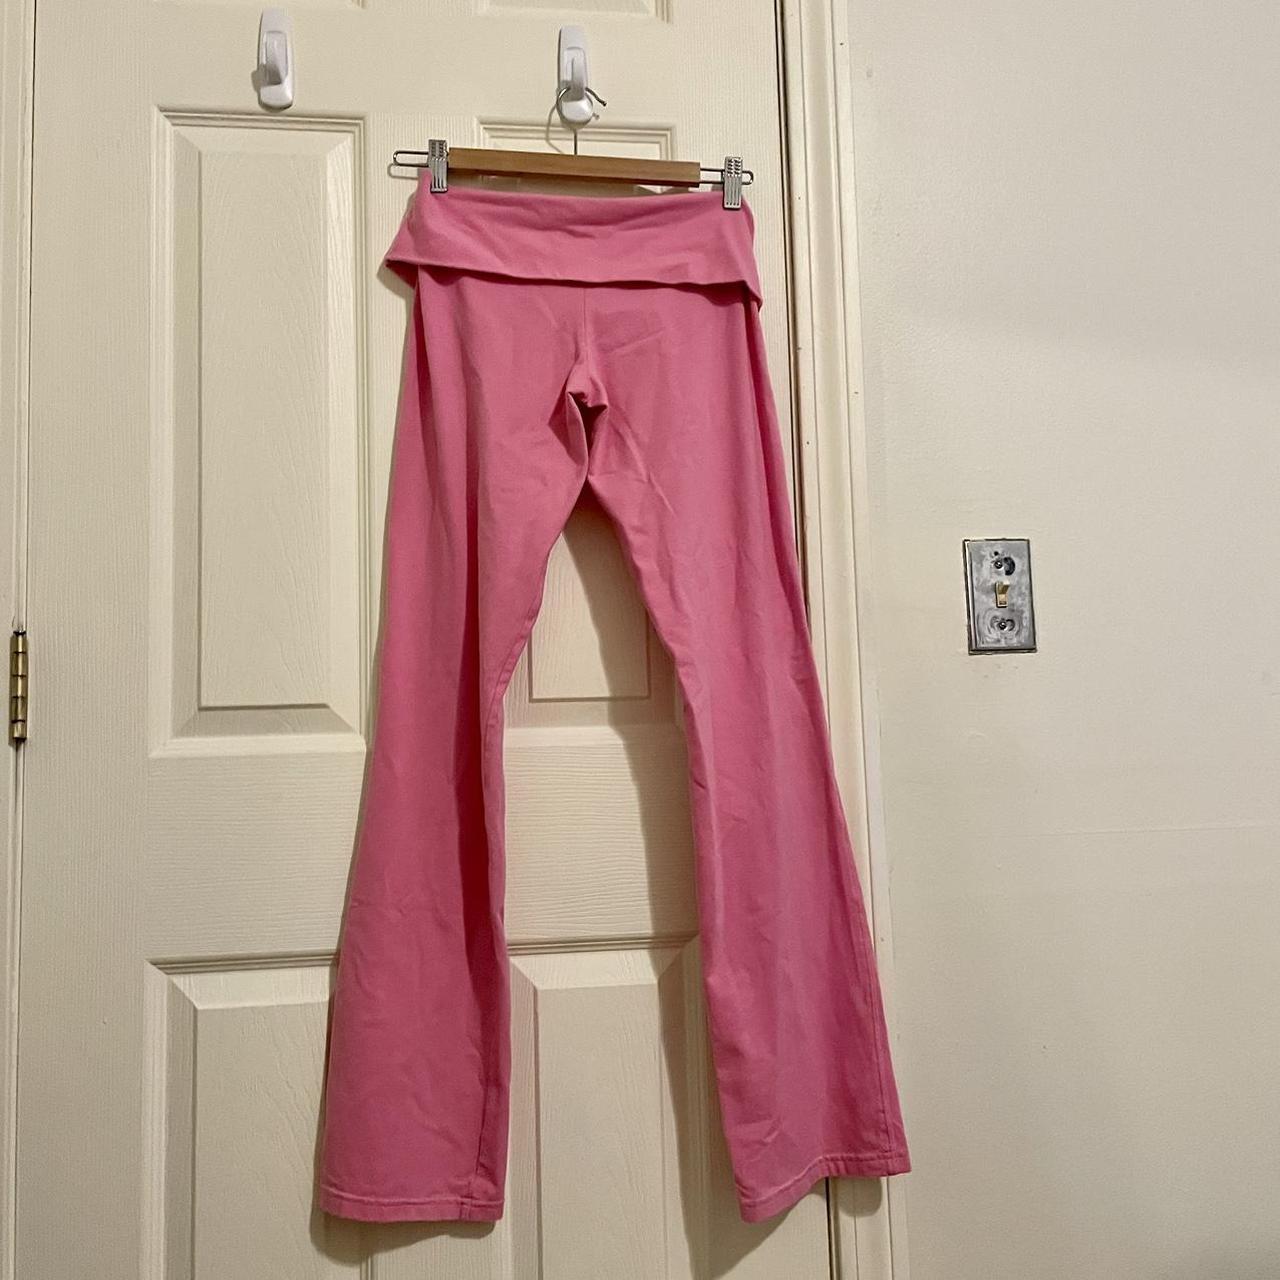 PINK - Victoria's Secret Fold Over Yoga Pants Size M - $12 - From Lici